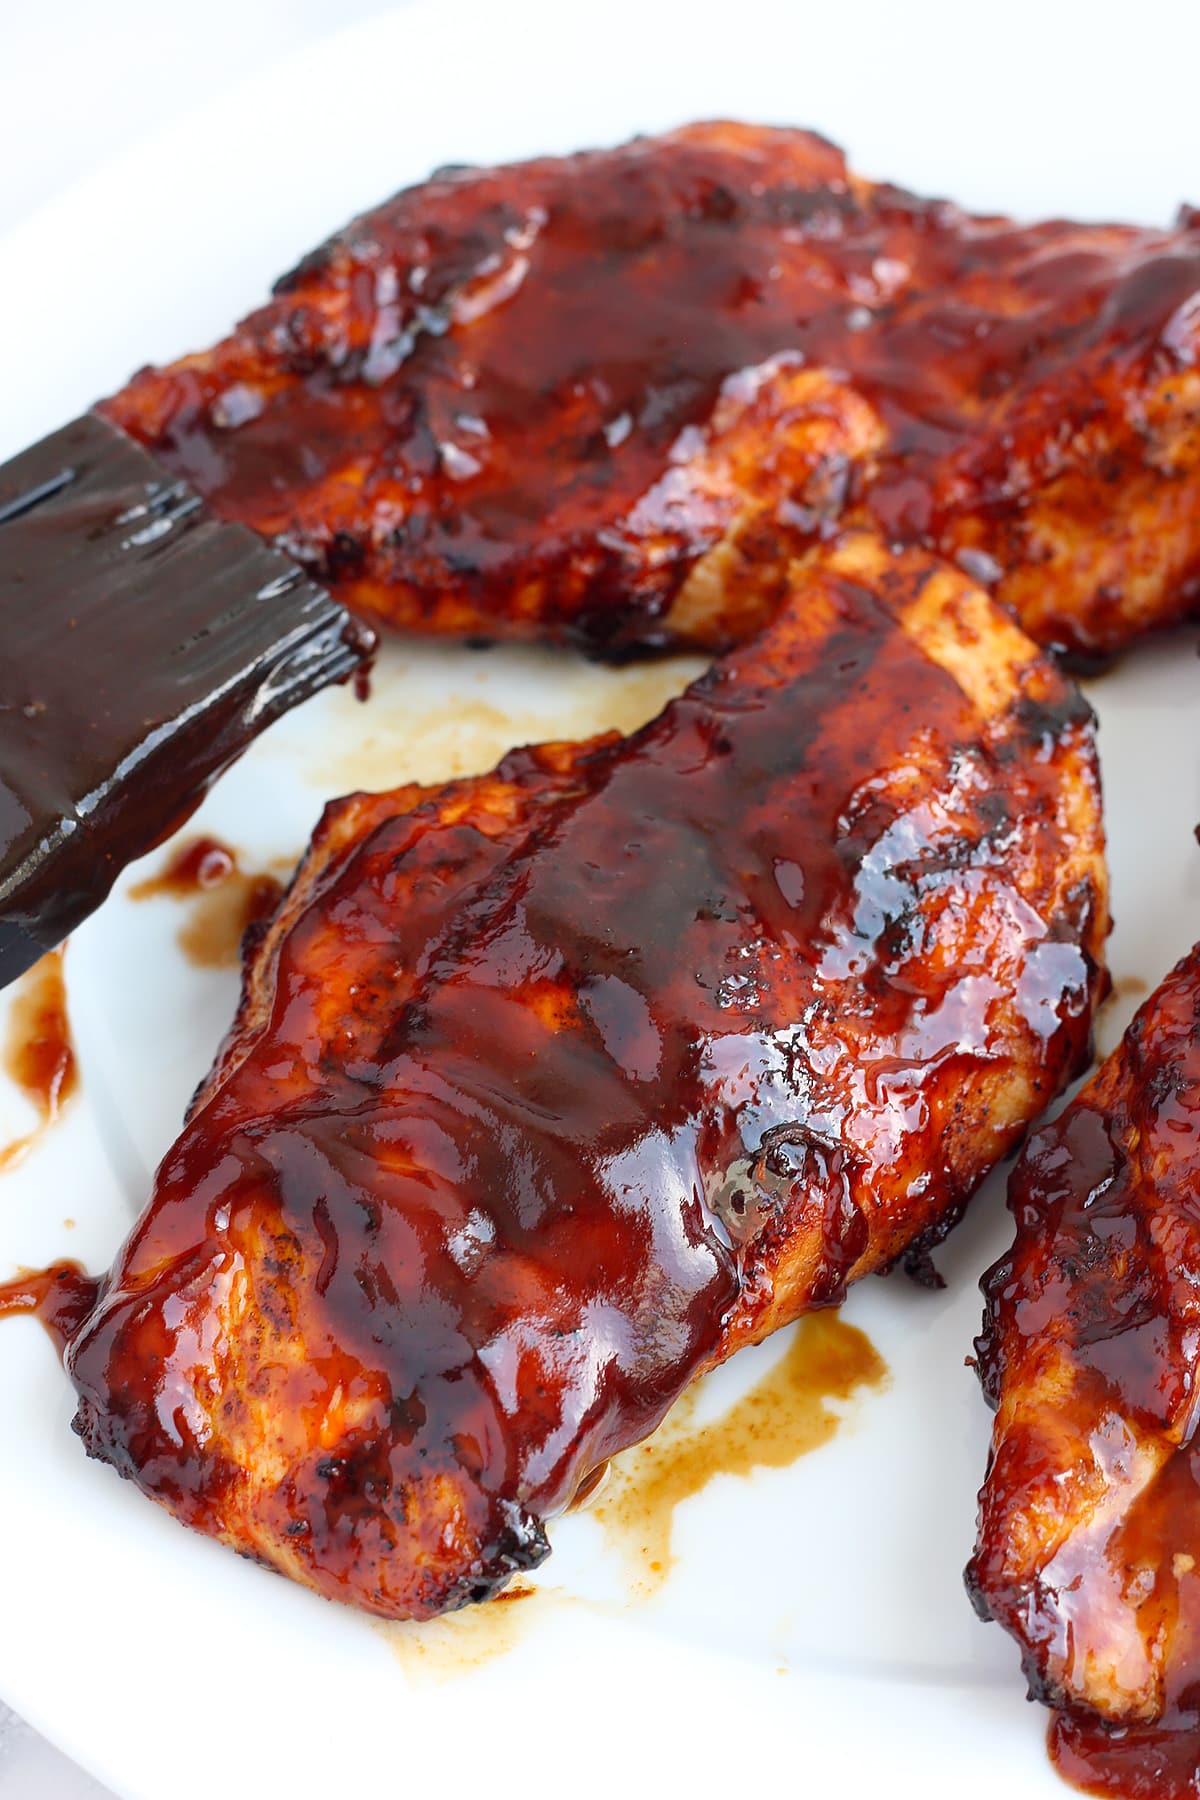 Barbecued chicken breasts coated in bbq sauce on a white plate.